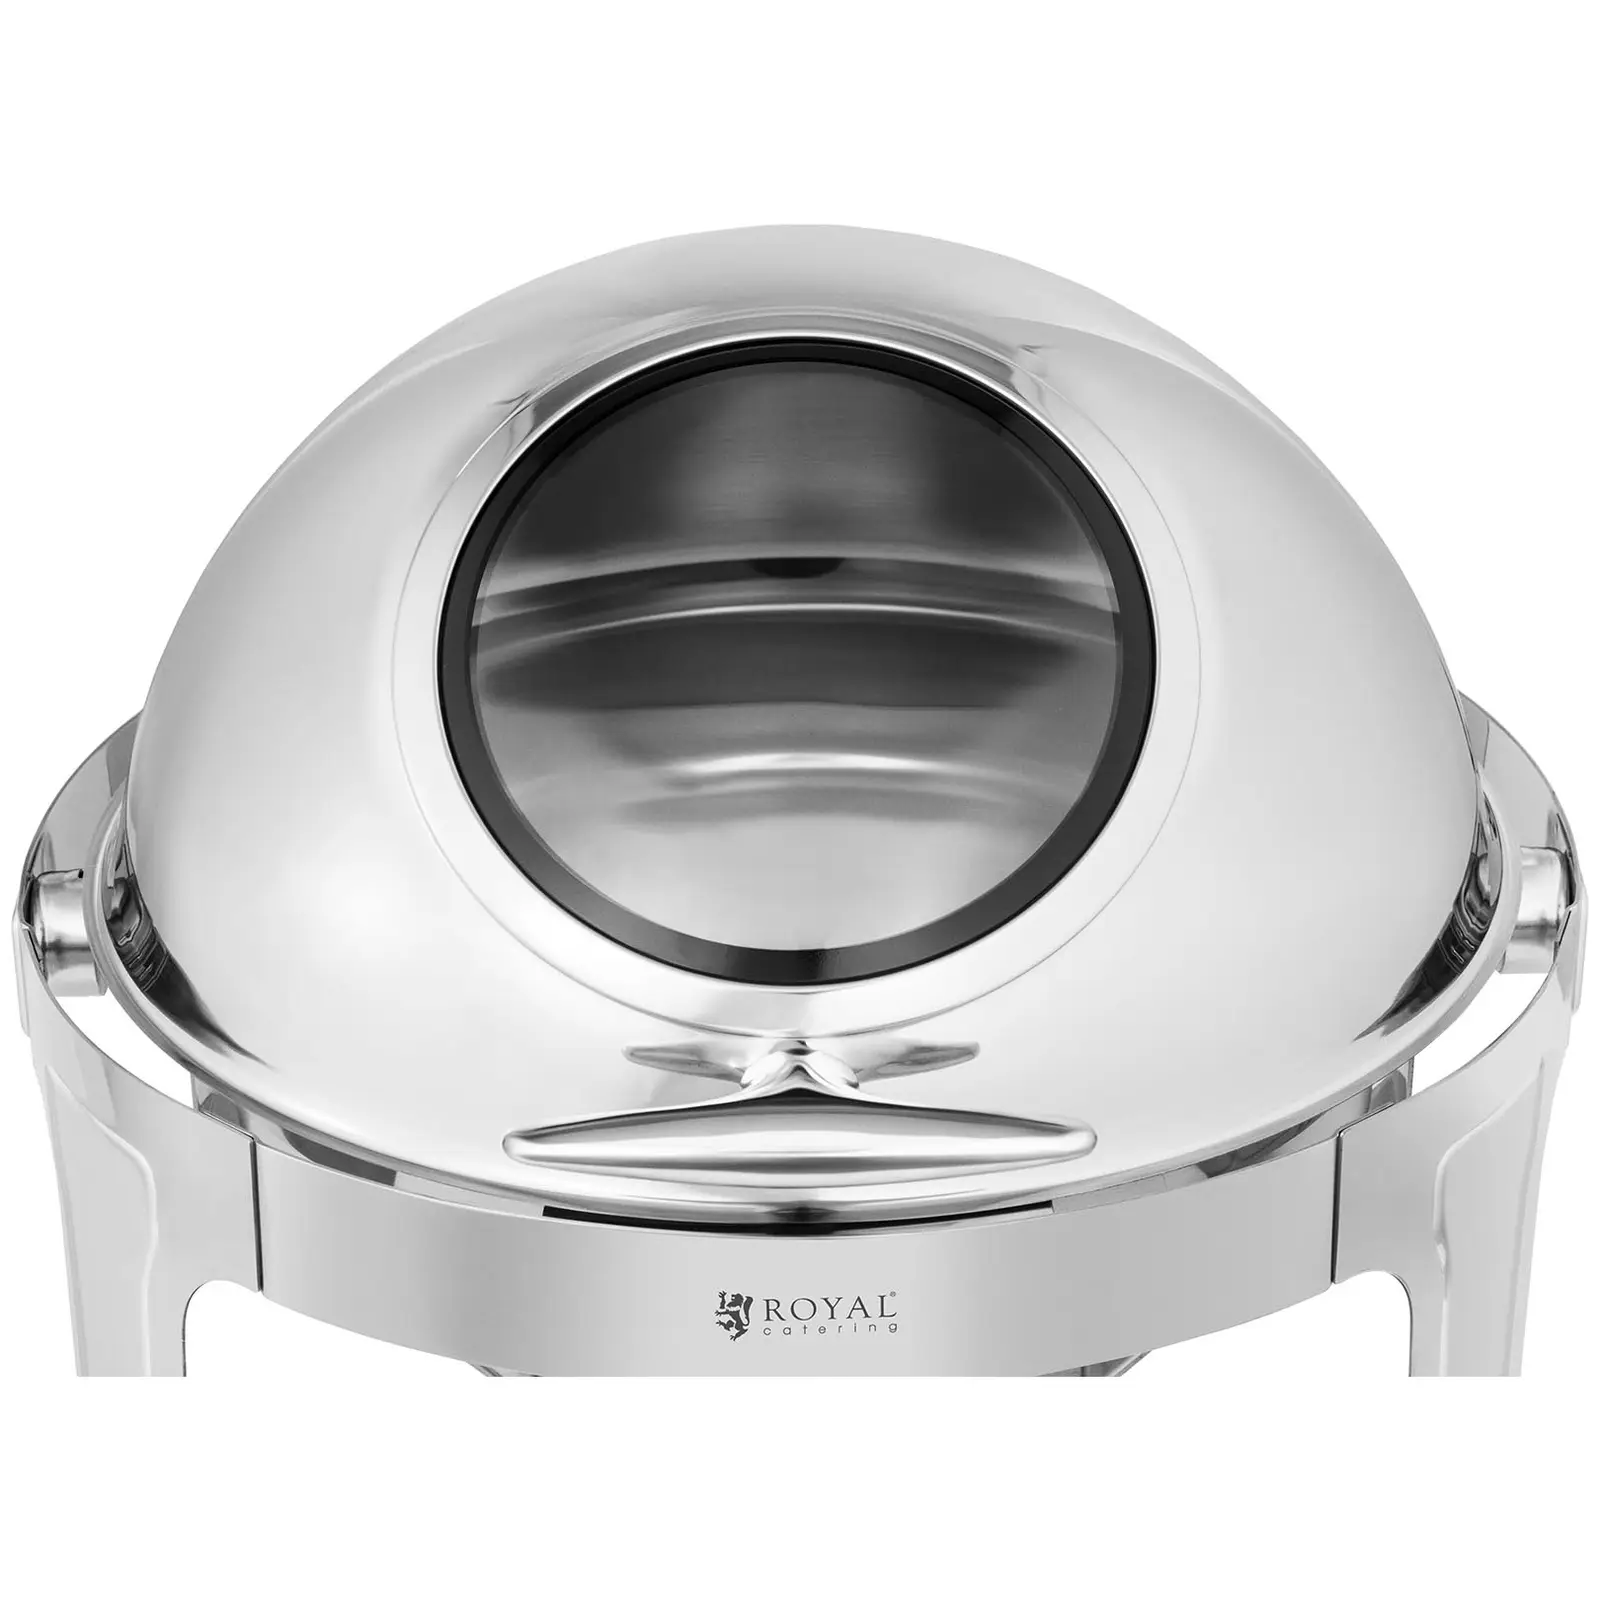 Chafing Dish - rund - Royal Catering - 5.8 L